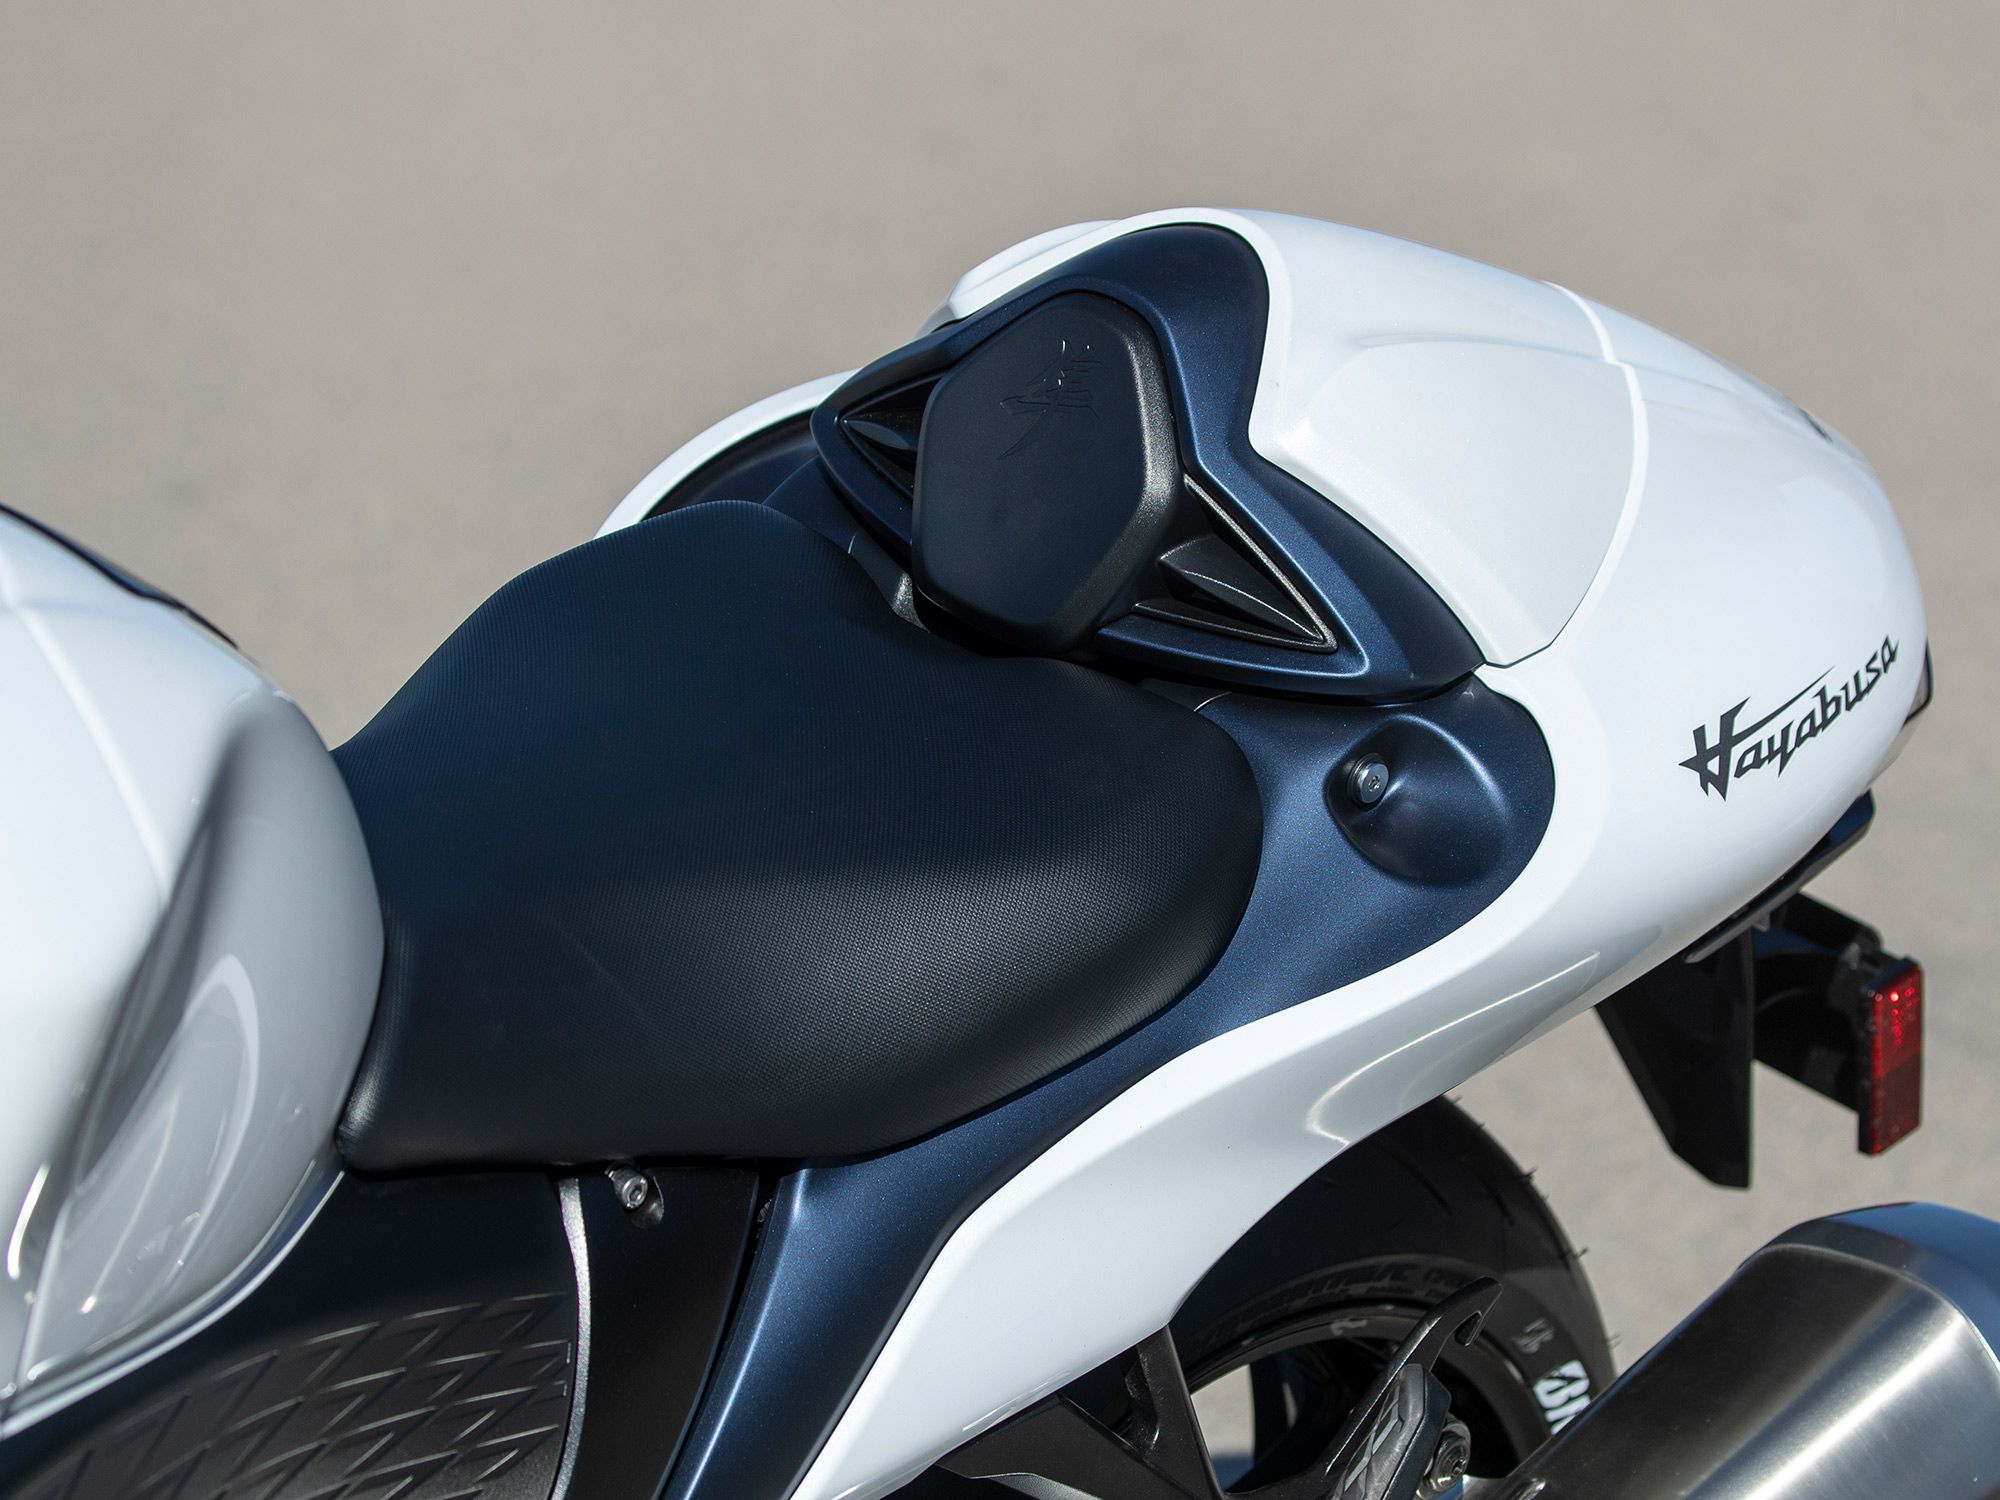 As usual, the Hayabusa sports a comfy rider seat that is well suited to long days in the saddle.